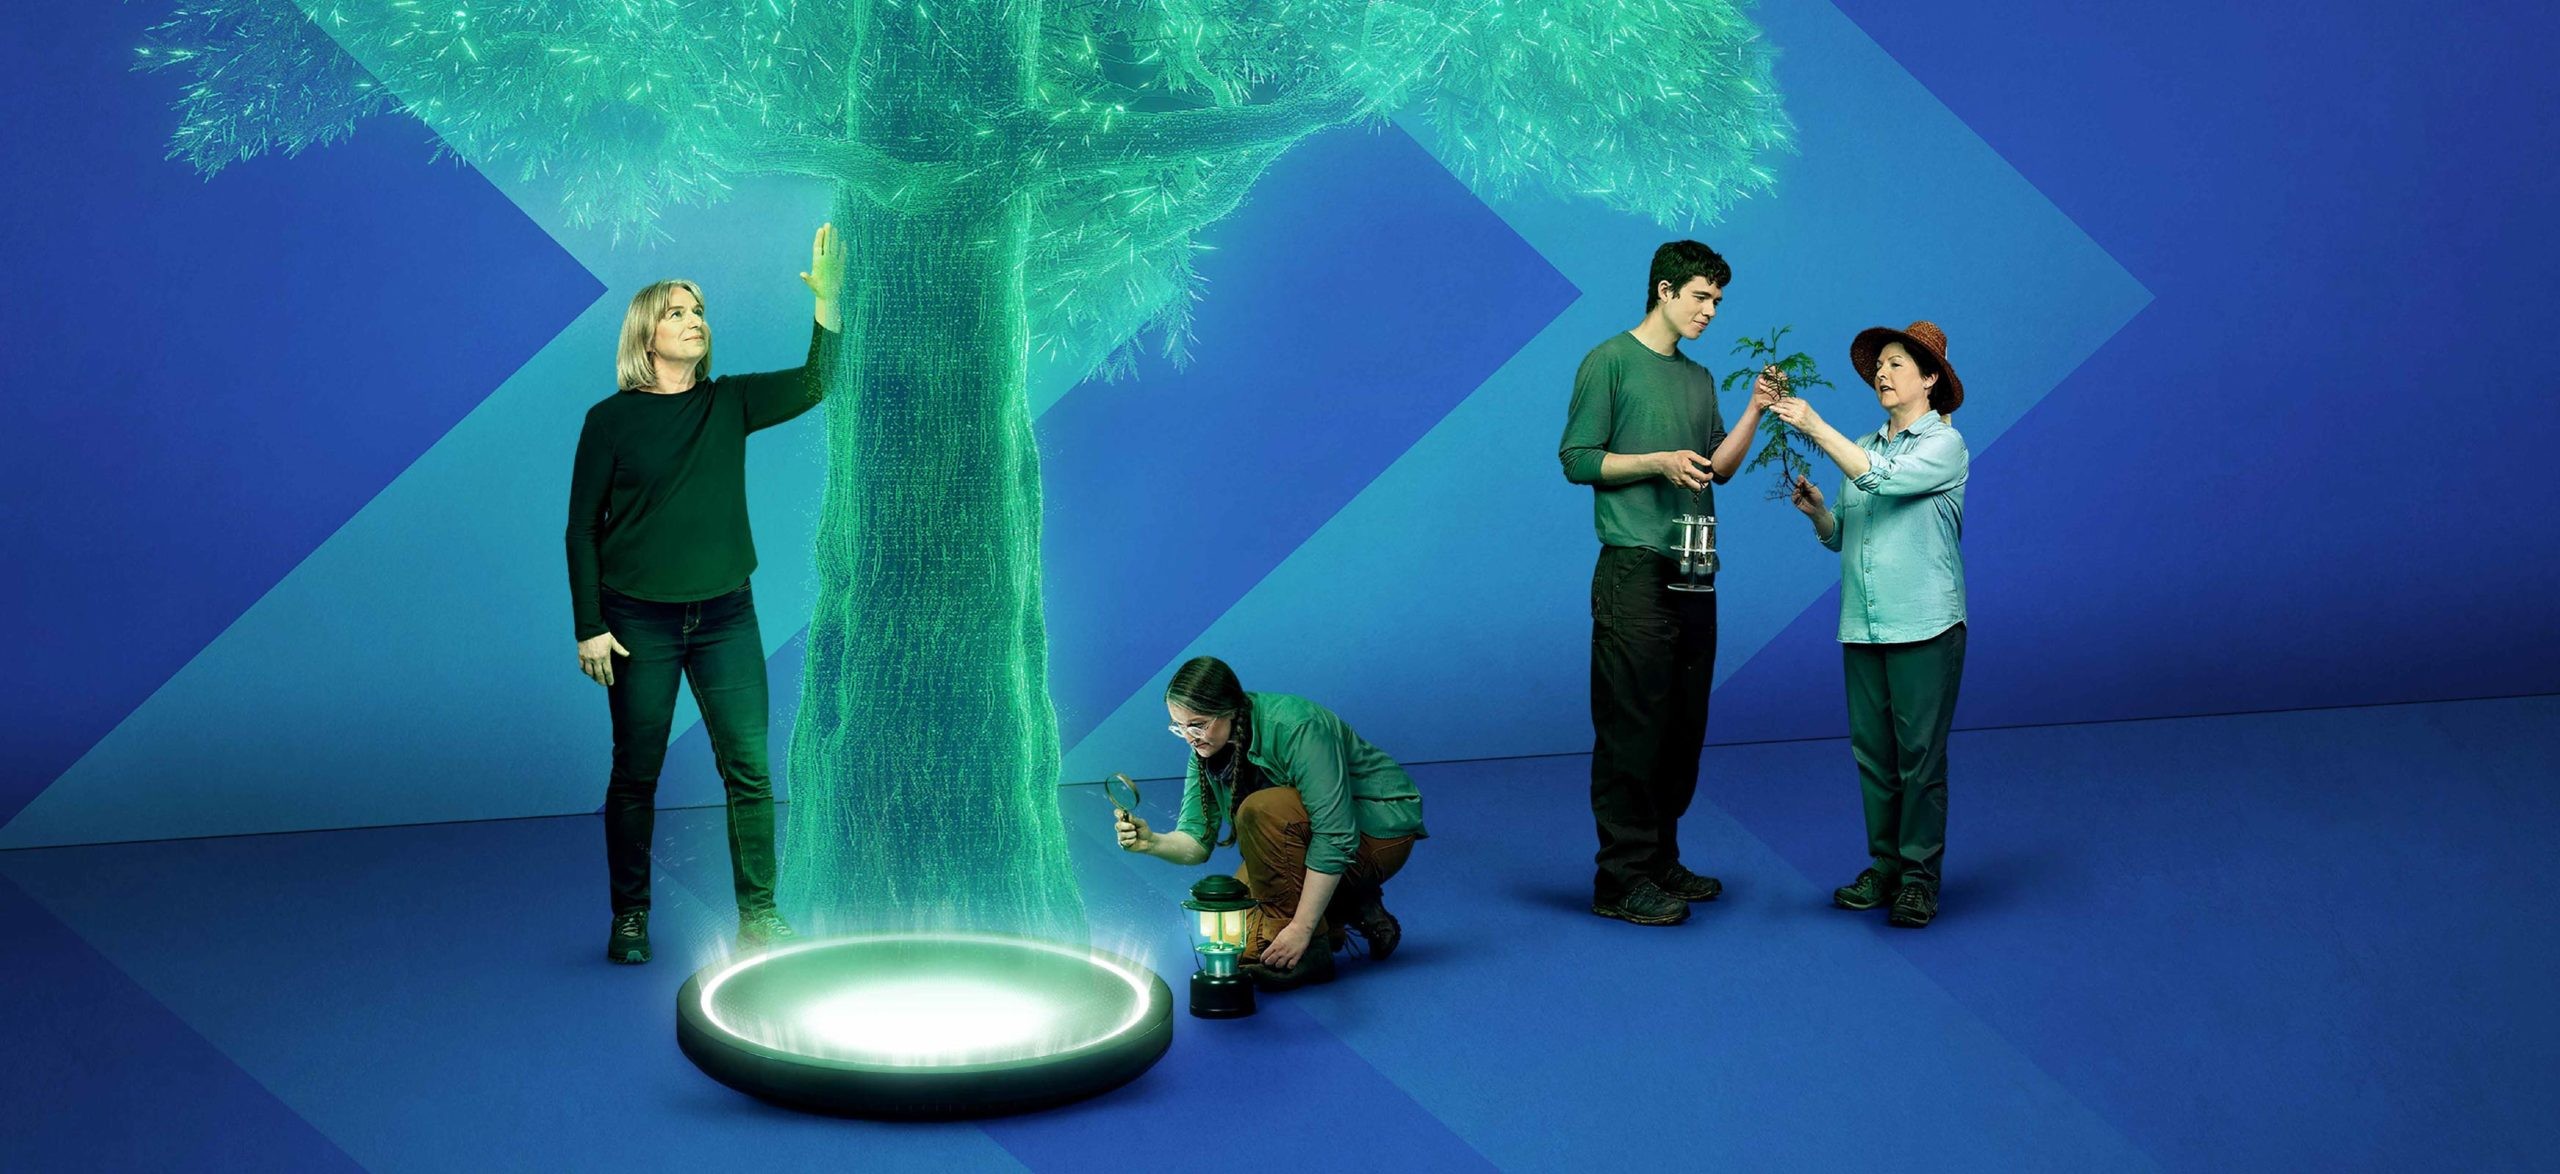 Dr. Suzanne Simard looks up at a green hologram of a tree while she places her hand on its trunk. UBC student Eva Snyder kneels down next to a lantern, inspecting the trunk with a magnifying glass. Hanno Southam and Dr. Teresa Ryan are standing to the right facing each other inspecting a small tree branch.